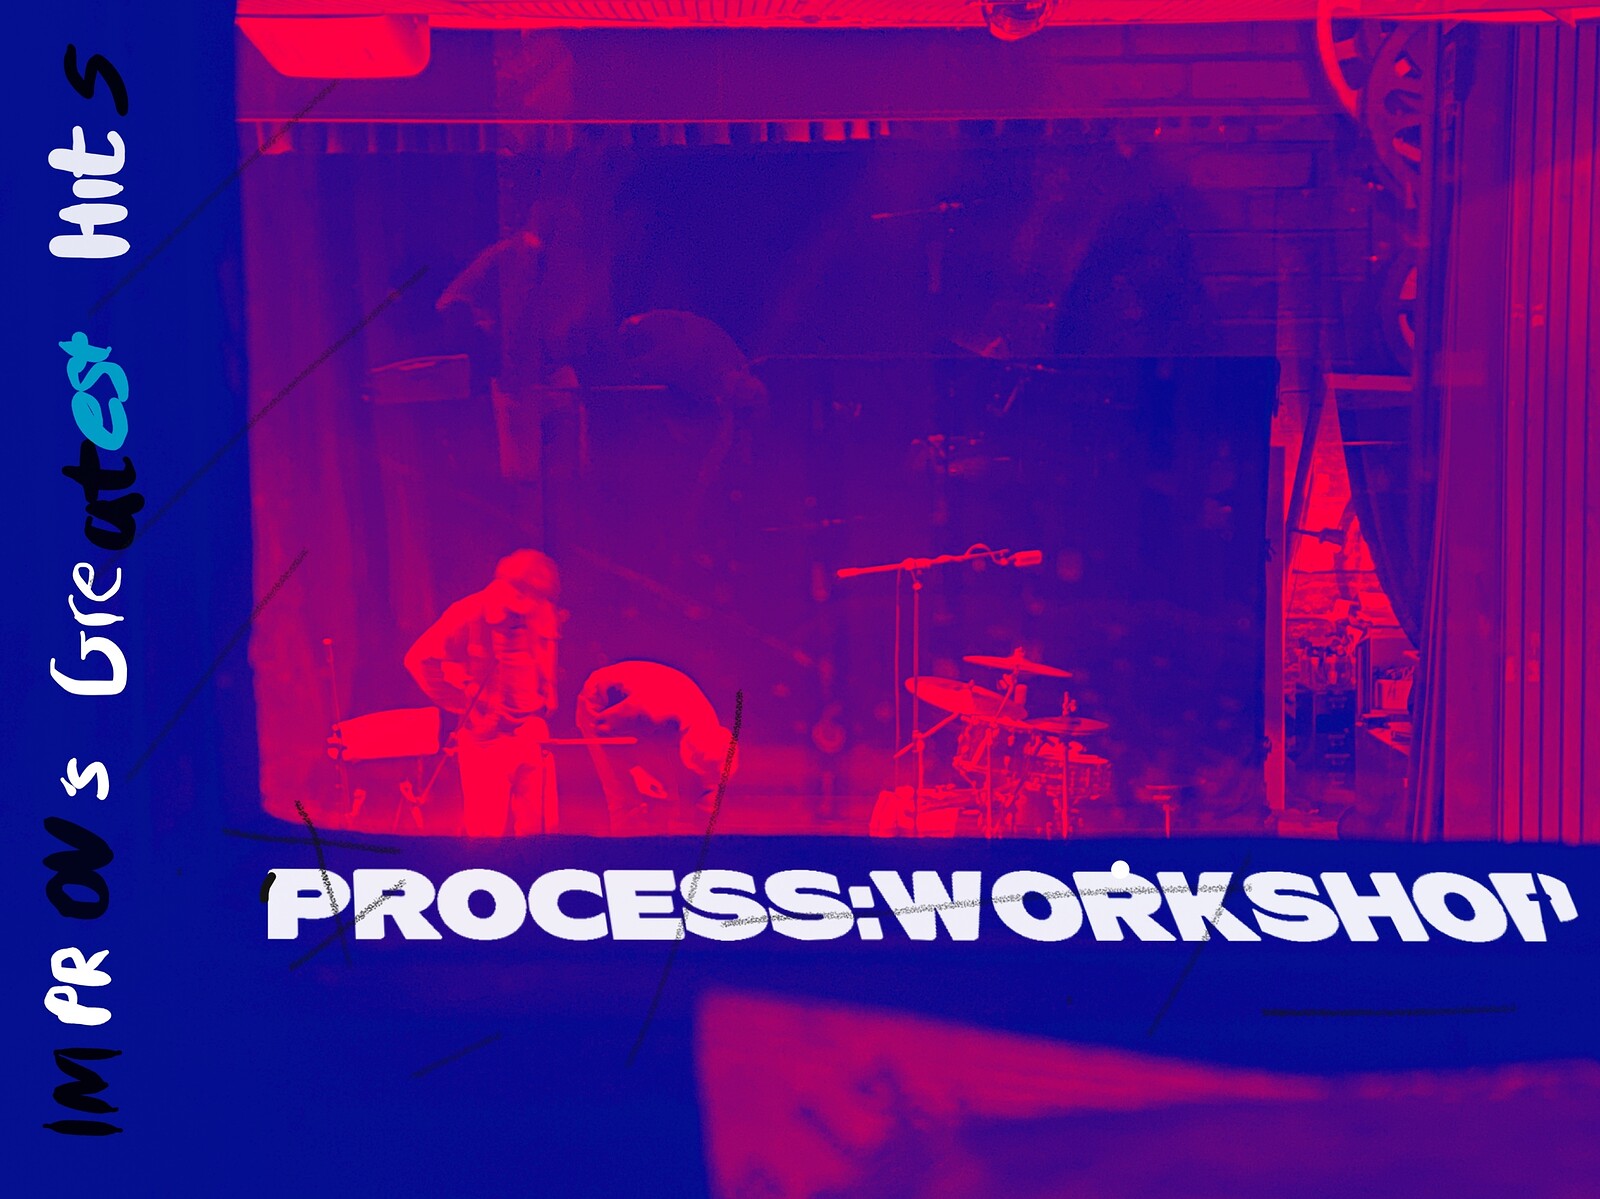 PROCESS:WORKSHOP at The Cube